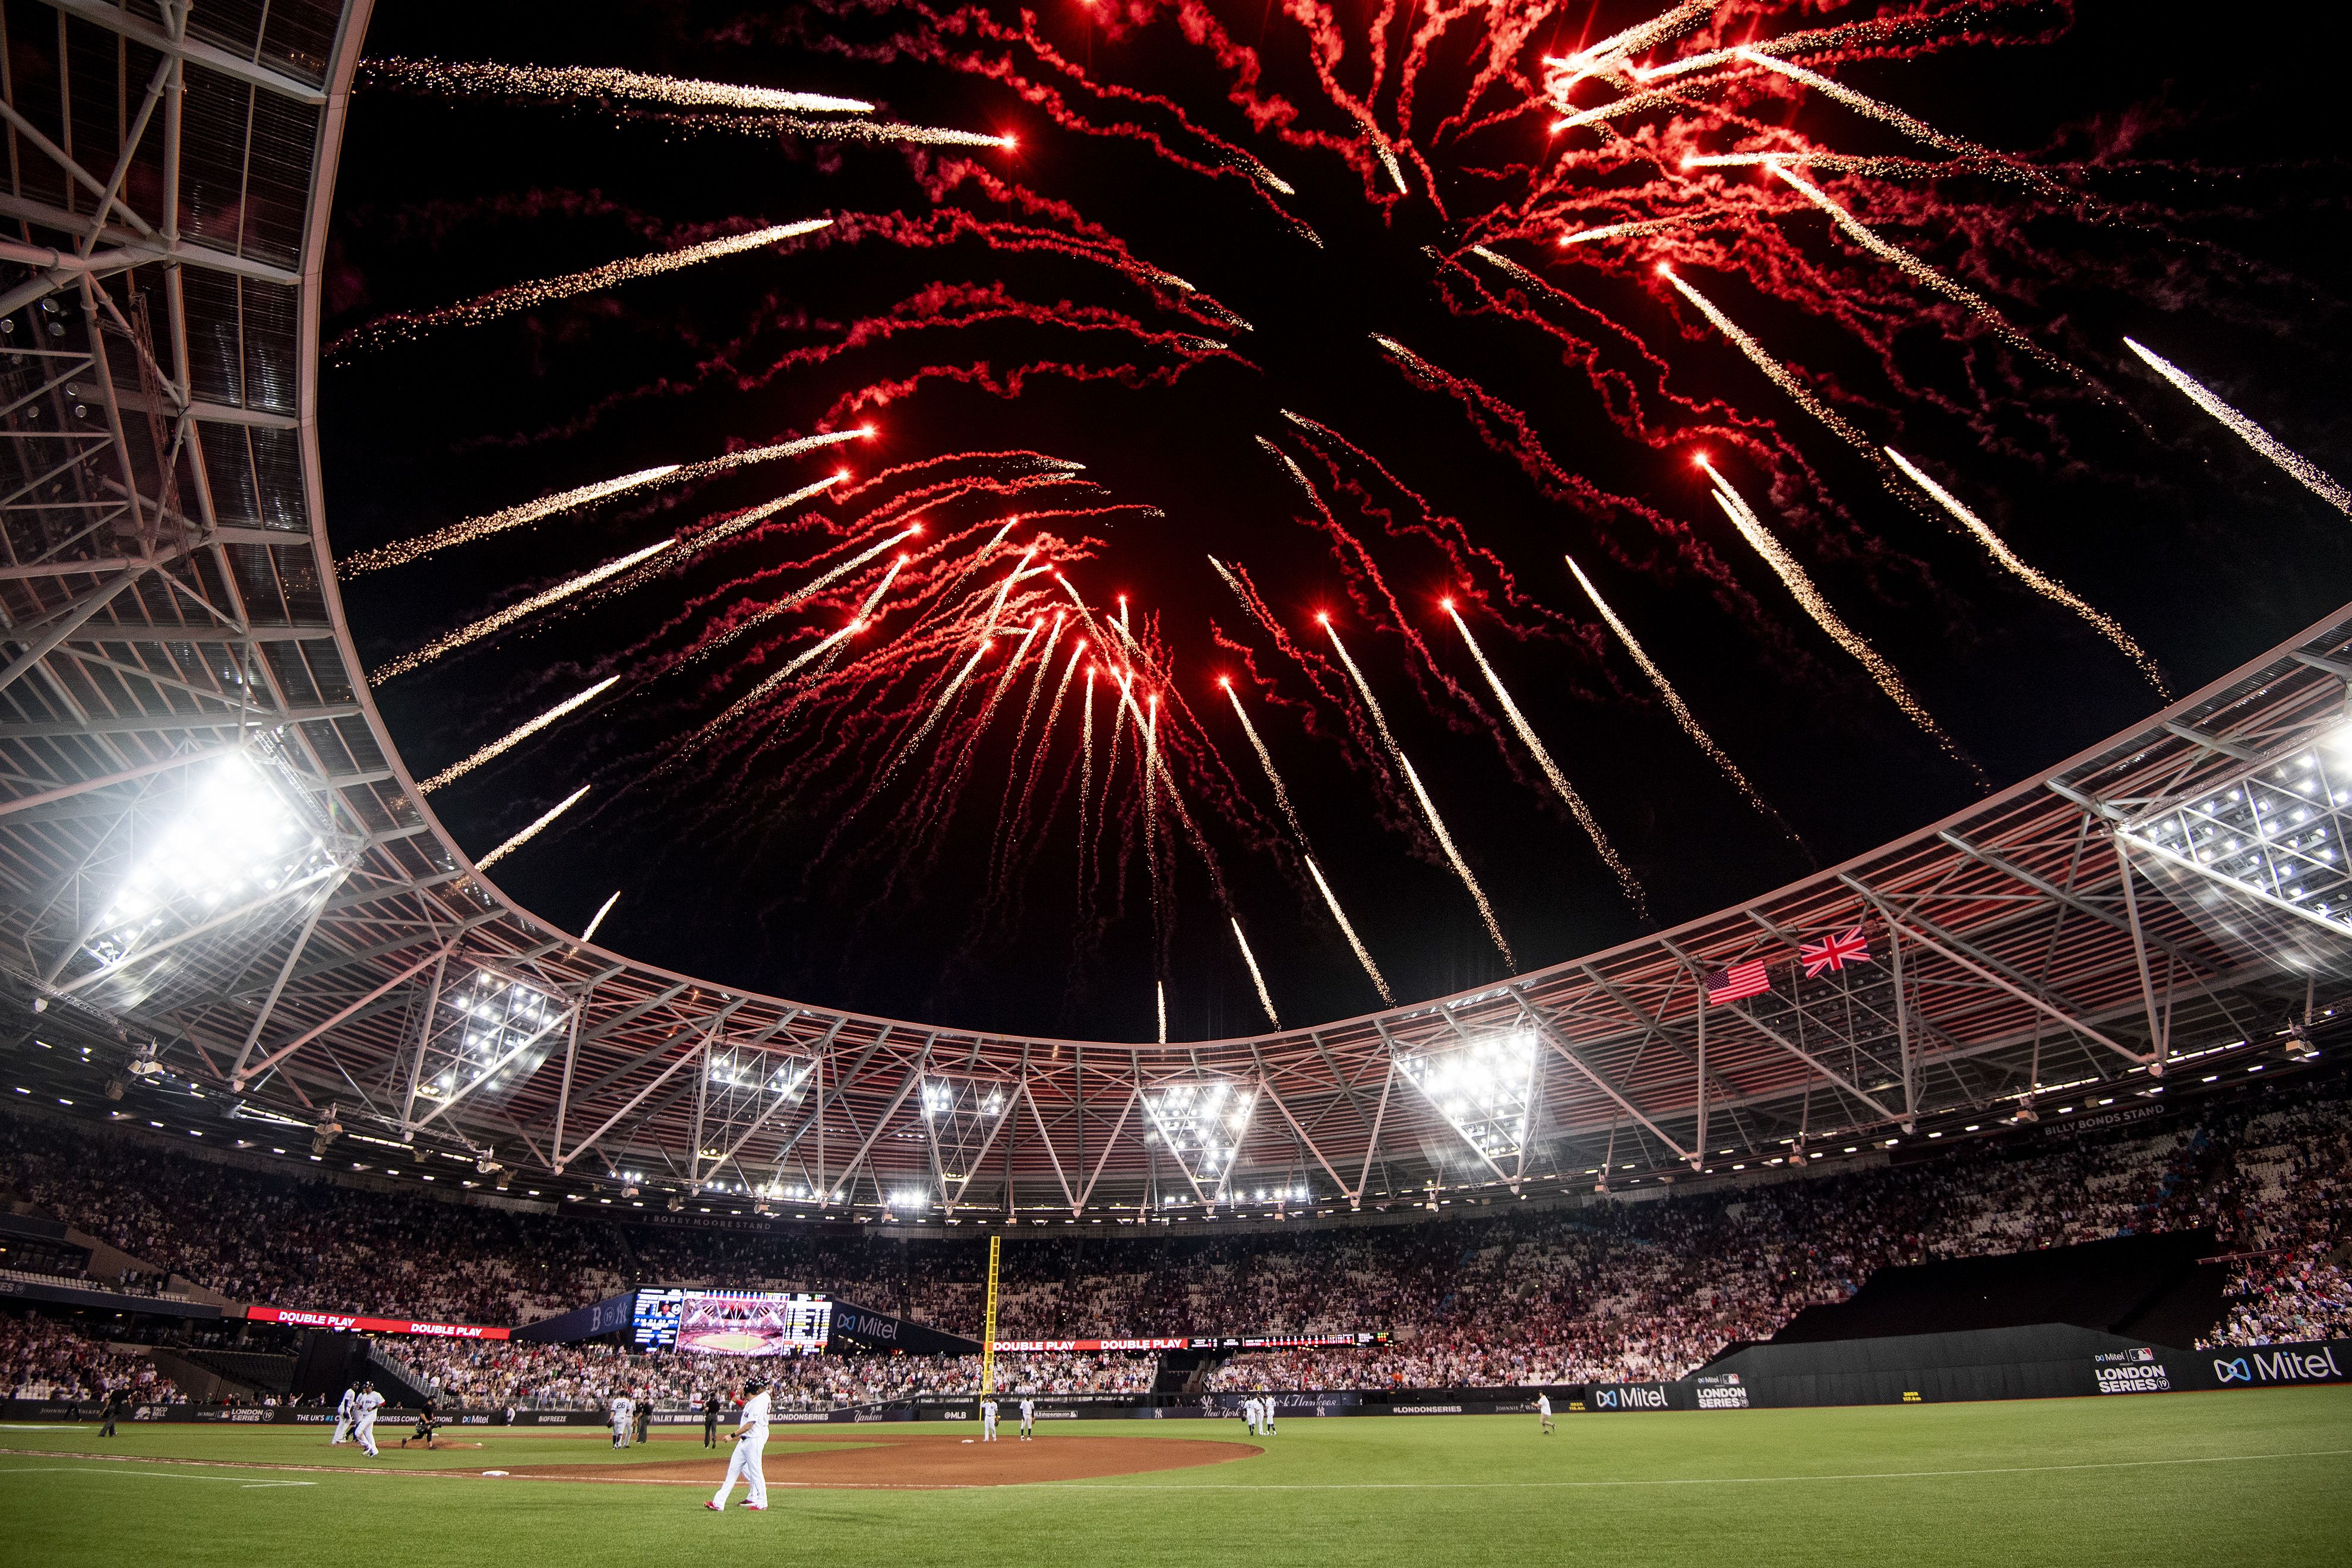 In pictures: Major League Baseball goes to London